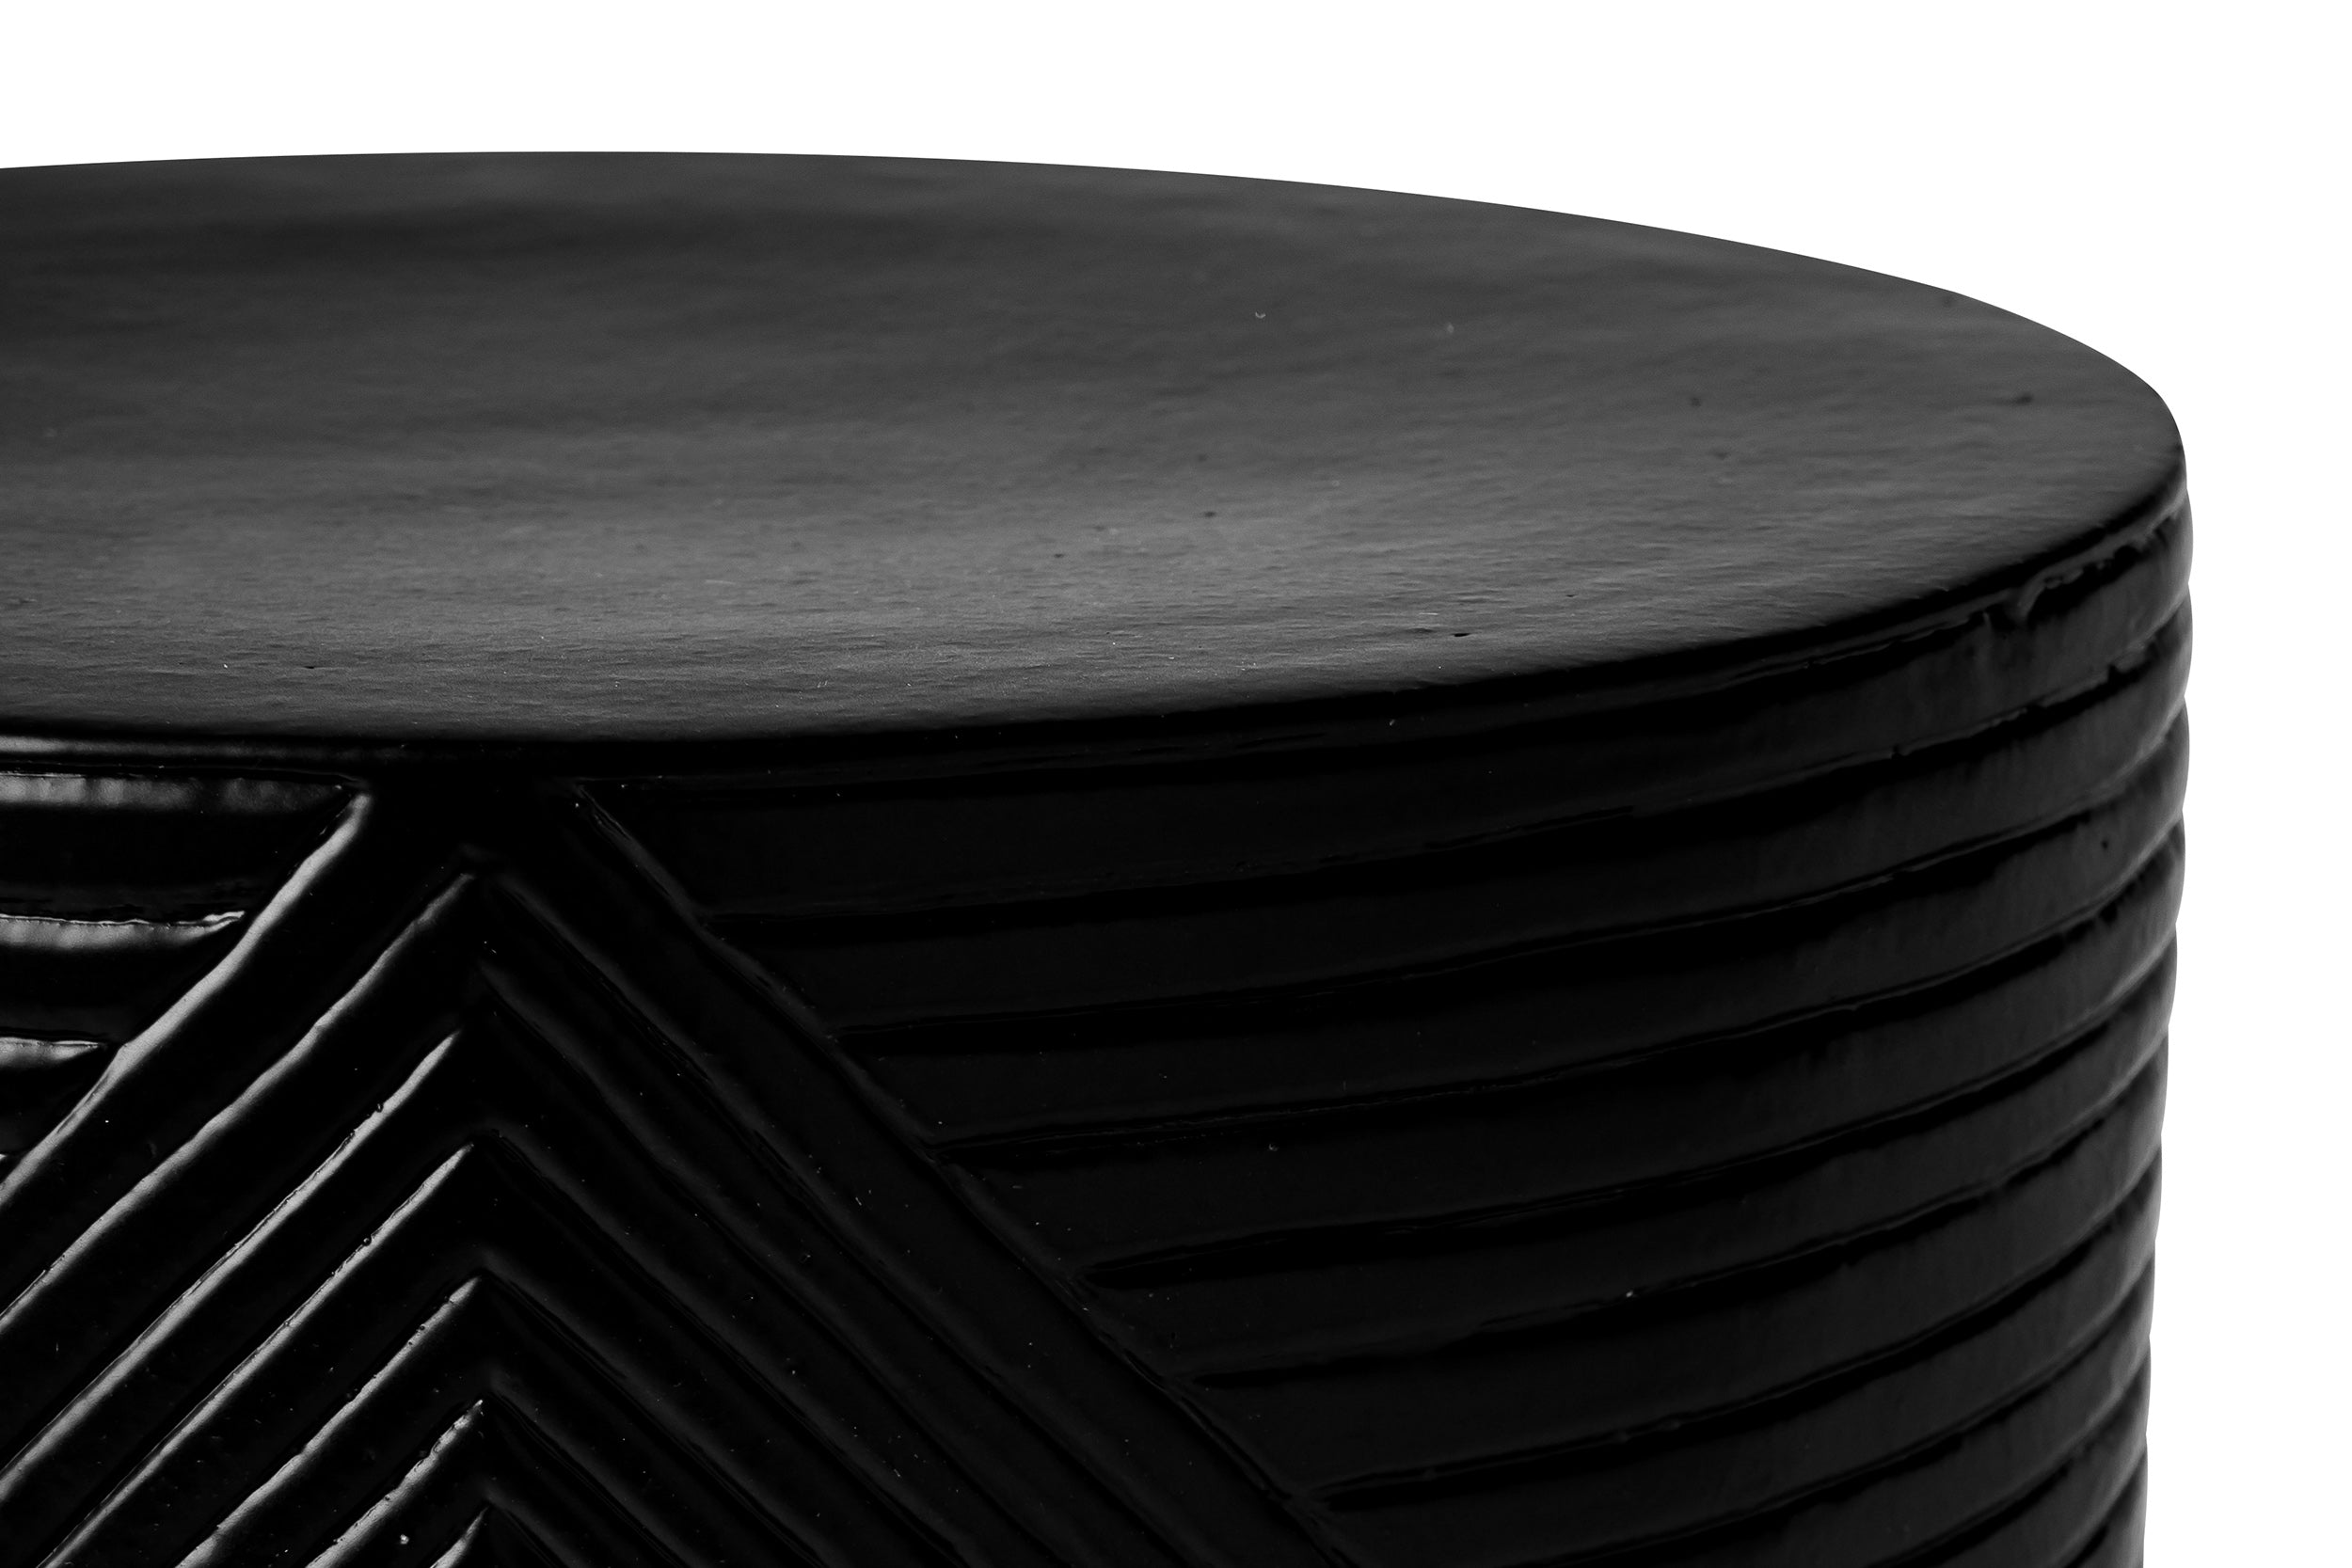 Serenity Textured Side Table 16&quot; - Black Outdoor Accent Table-Outdoor Side Tables-Seasonal Living-LOOMLAN